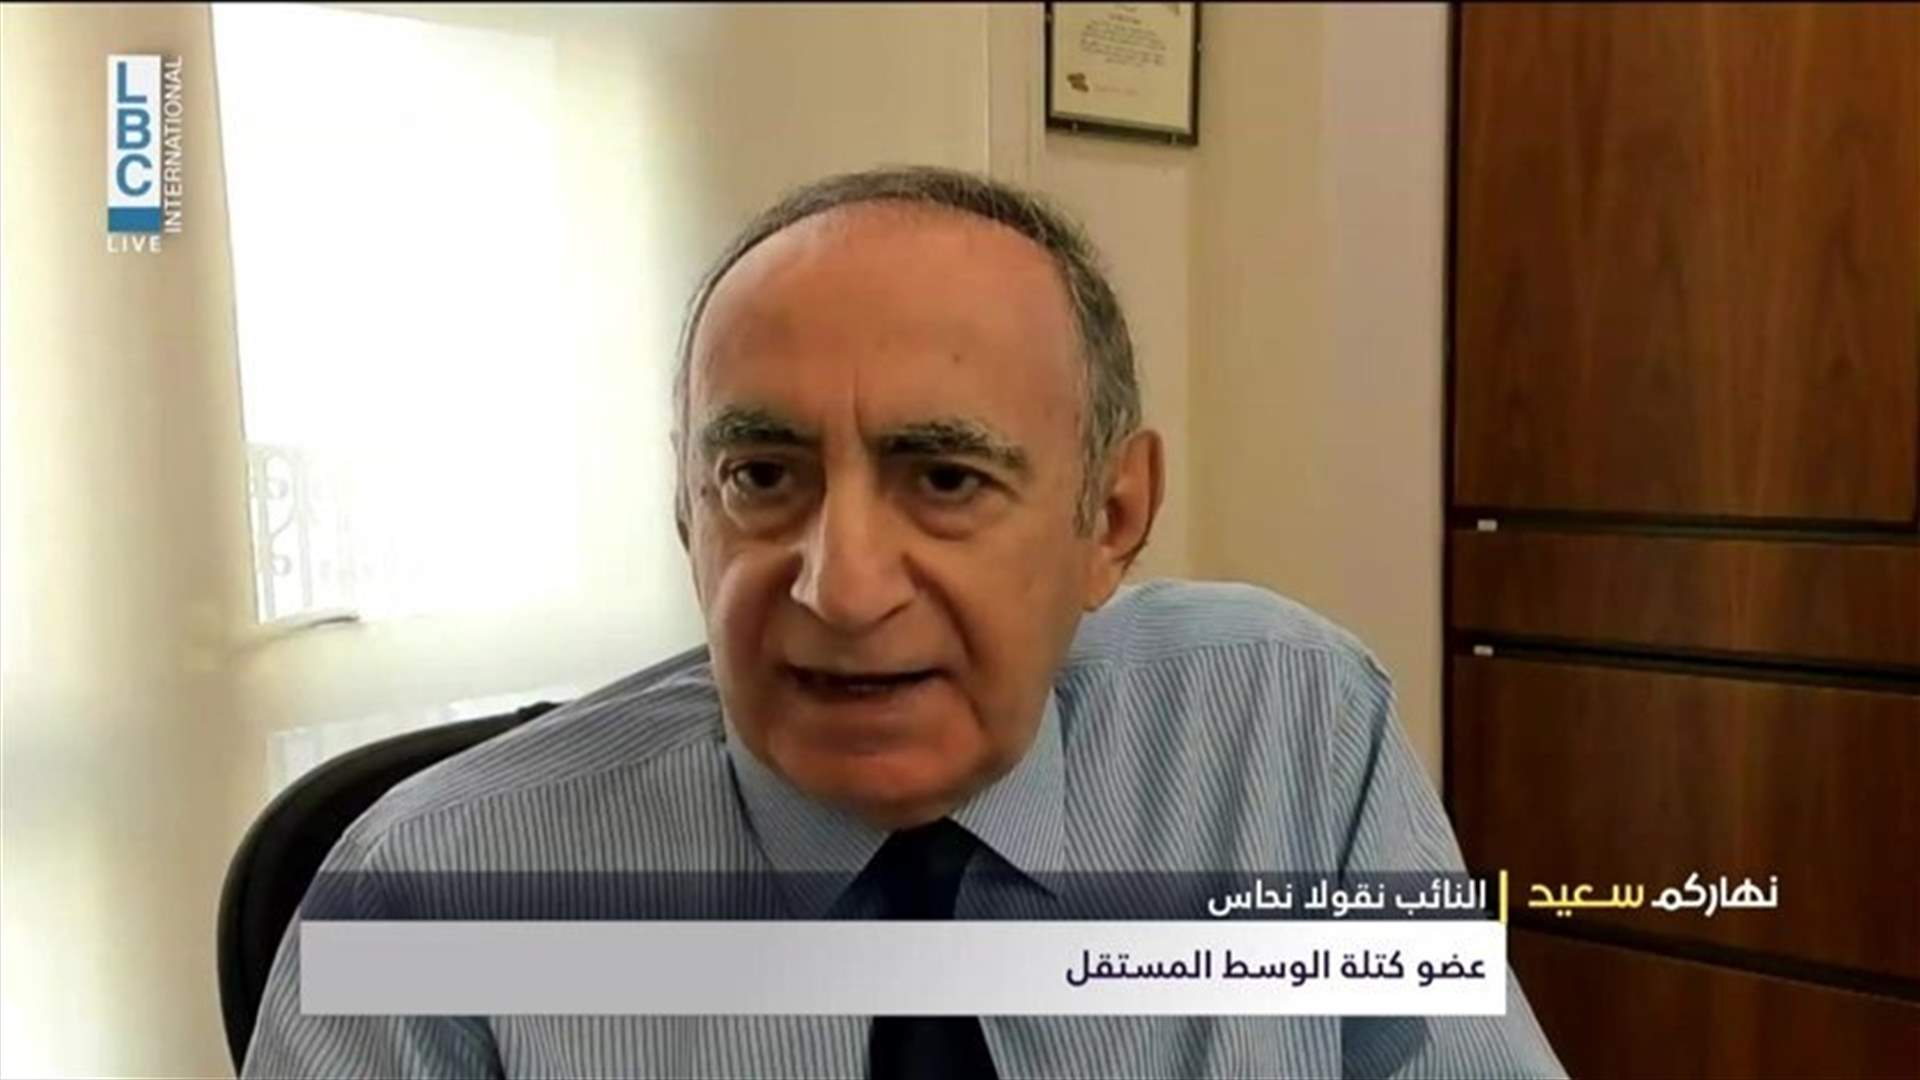 MP Nahas to LBCI: There is a foreign agreement to guarantee Lebanon stability